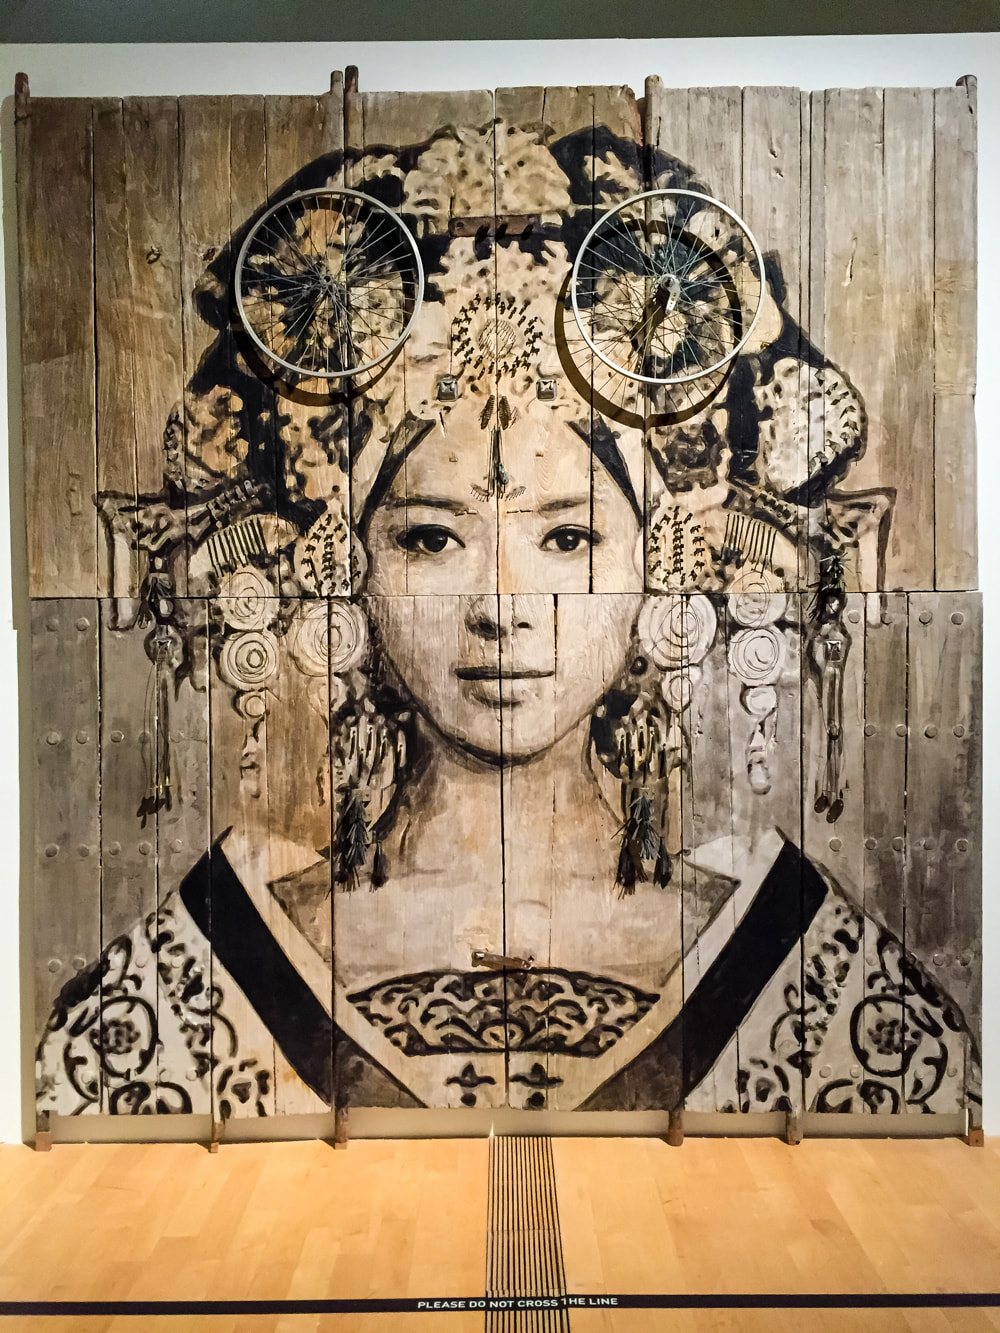 Singapore: Art From The Streets Exhibition at the ArtScience Museum - Empress Wu - YZ - 2016.